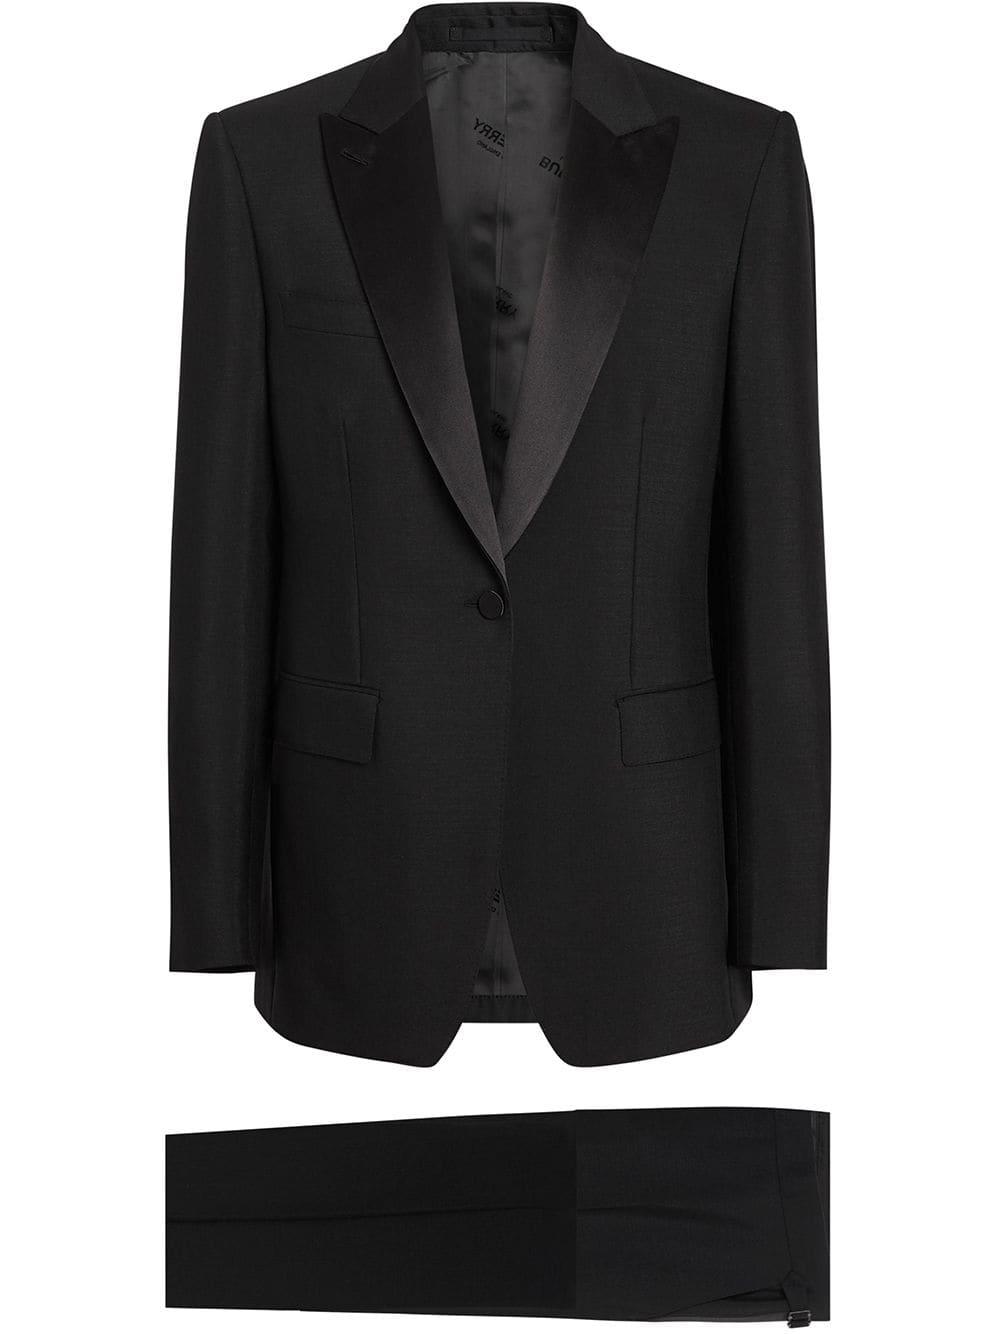 Burberry English Fit Mohair Wool Tuxedo in Black for Men - Lyst